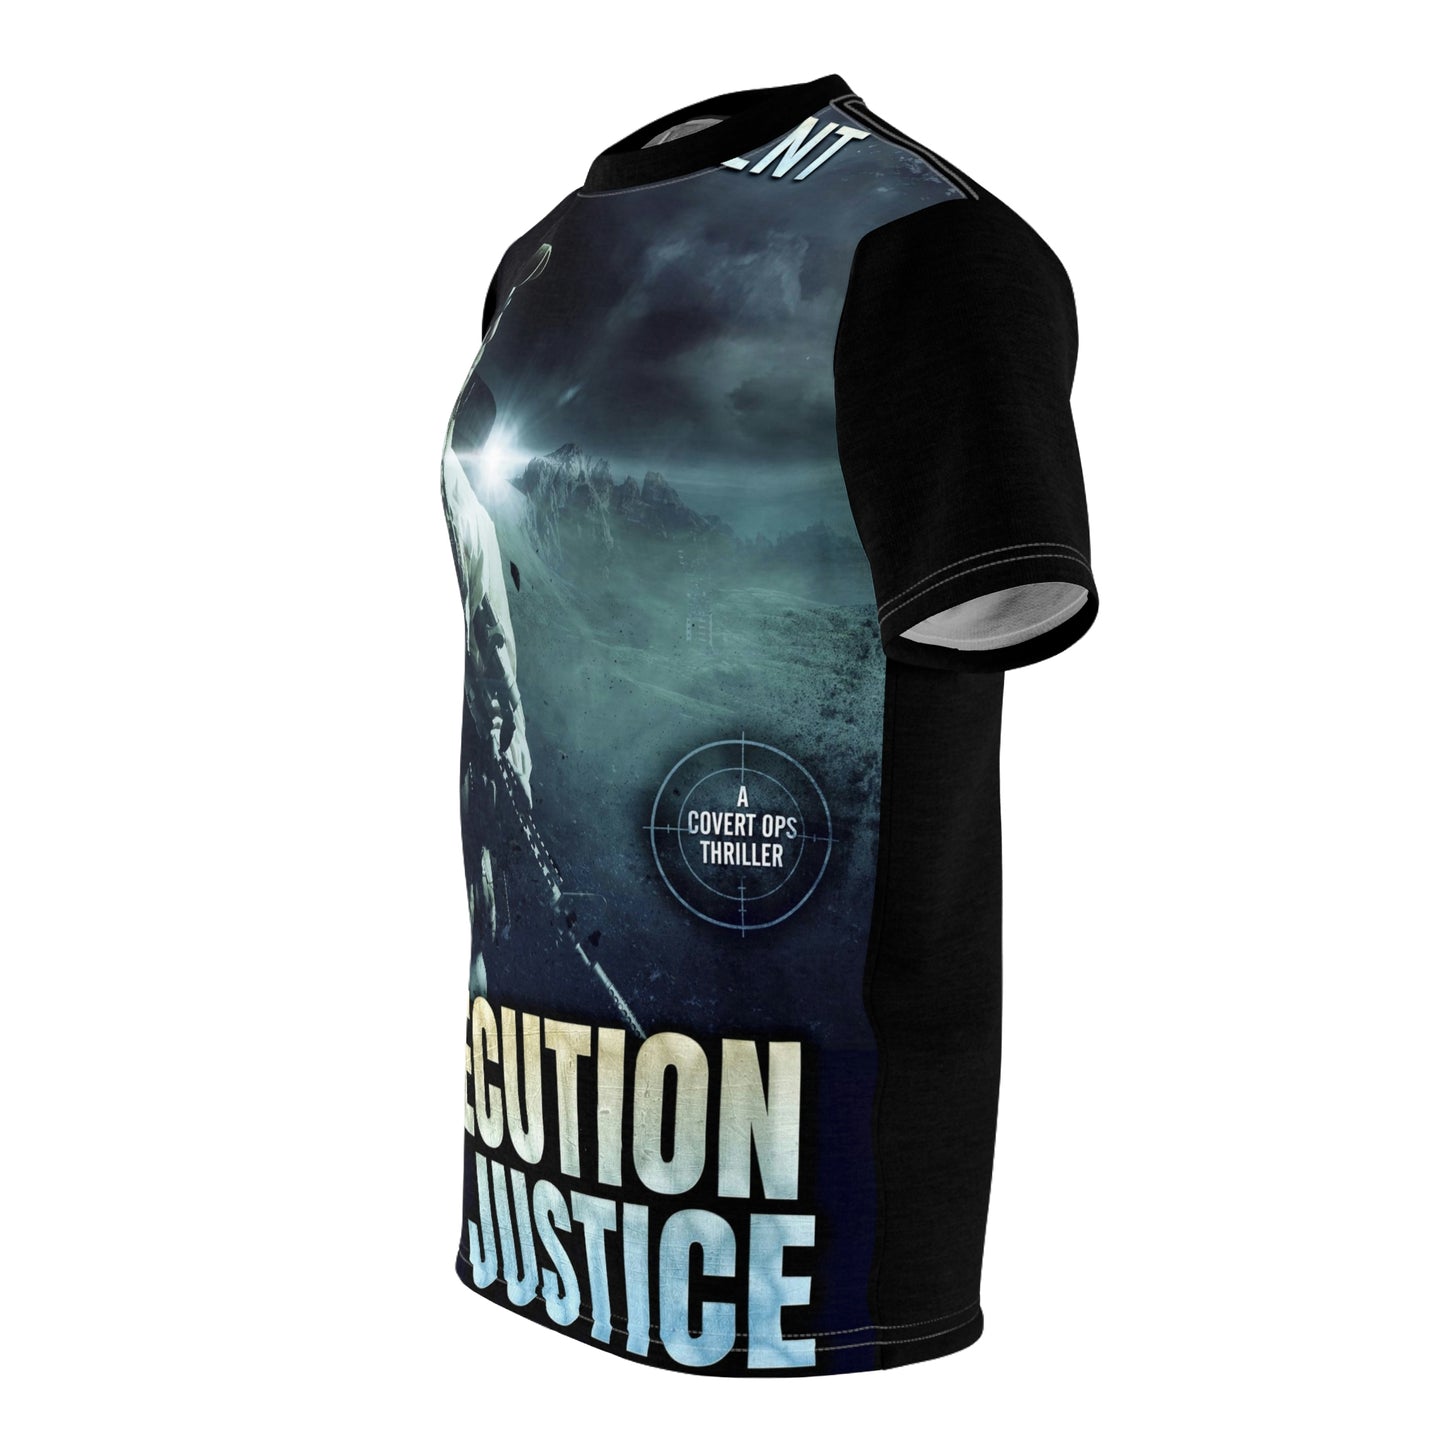 Execution of Justice - Unisex All-Over Print Cut & Sew T-Shirt